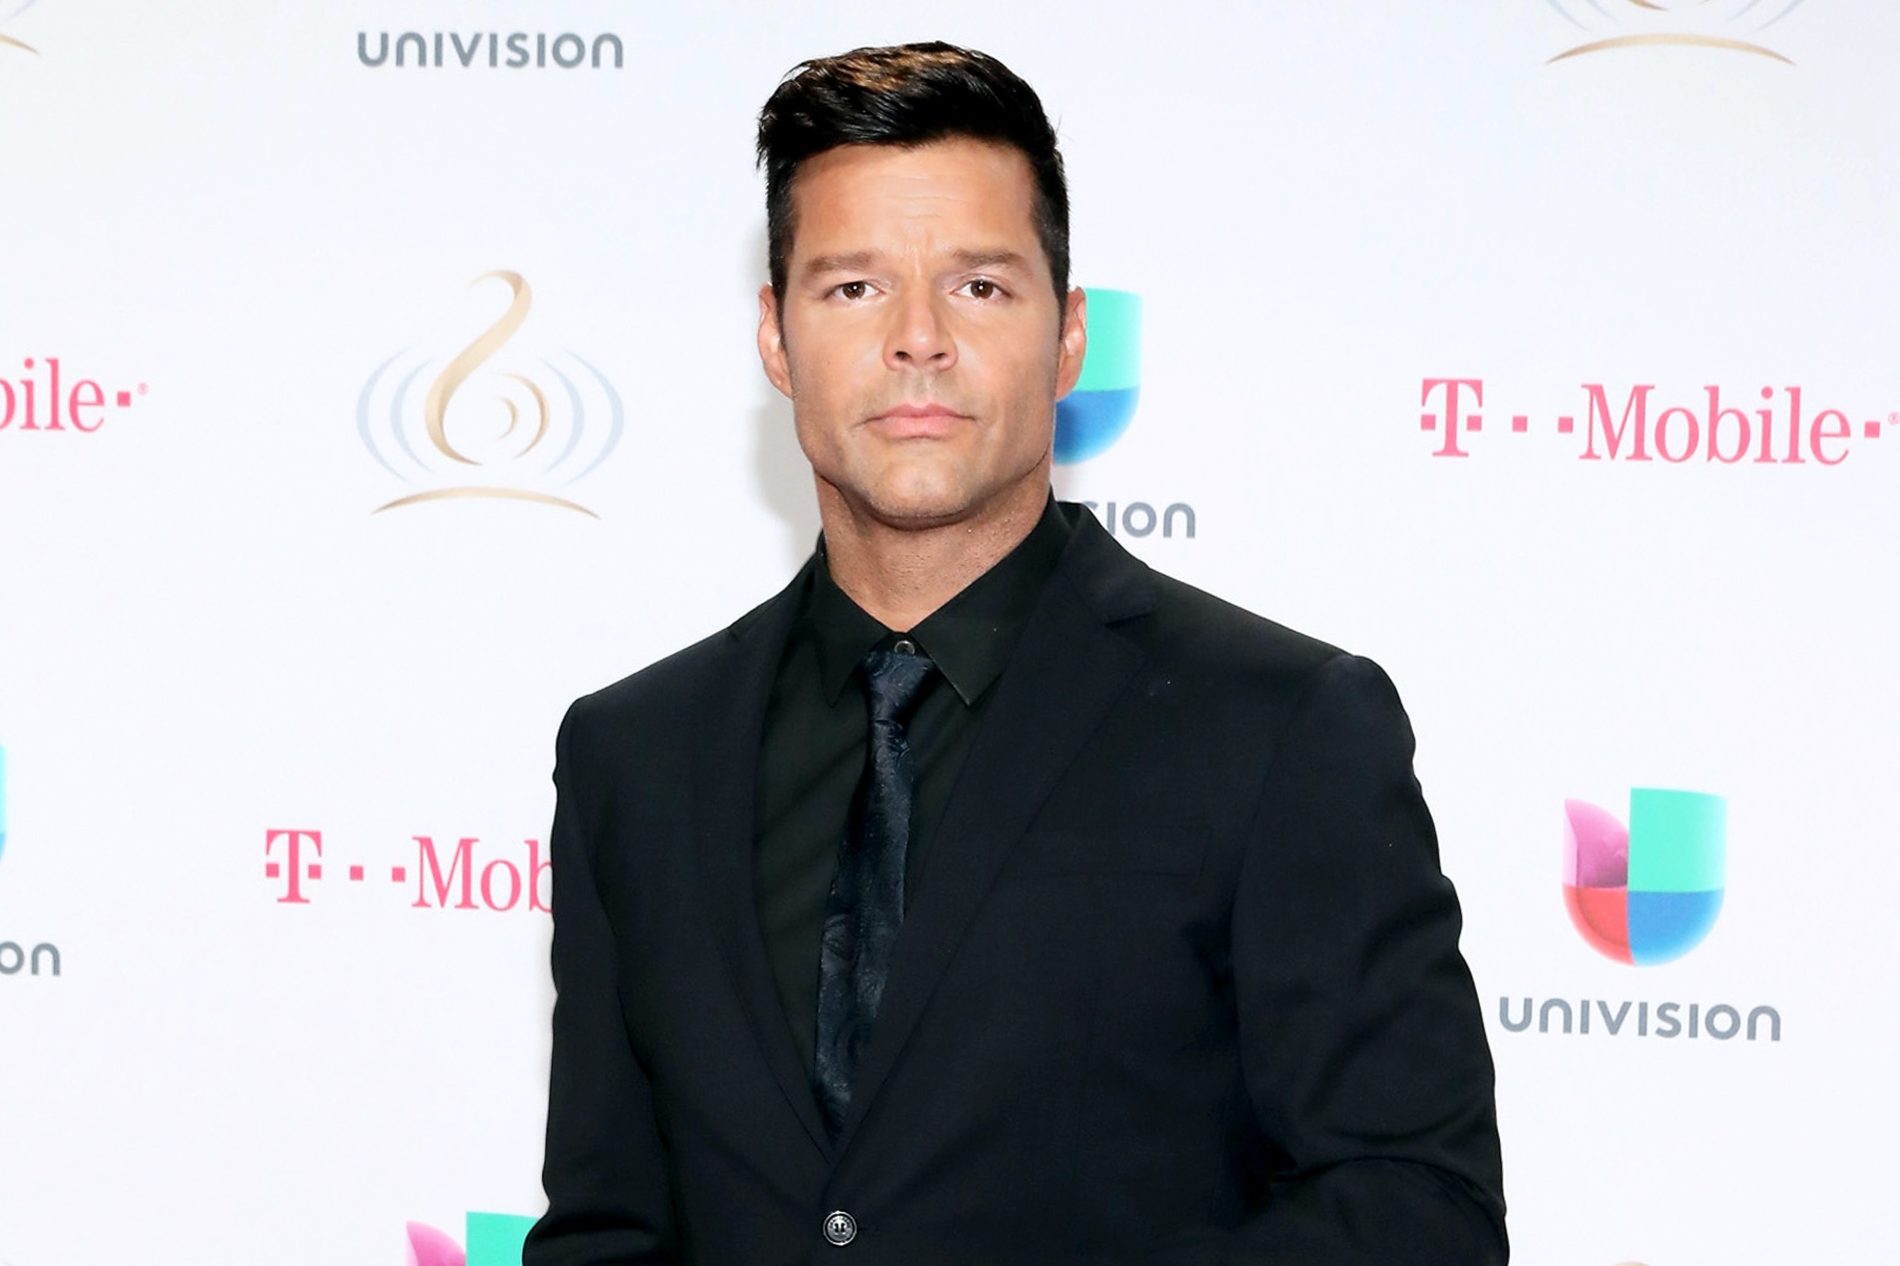 Ricky Martin to Play Gianni Versace’s Lover in ‘American Crime Story’